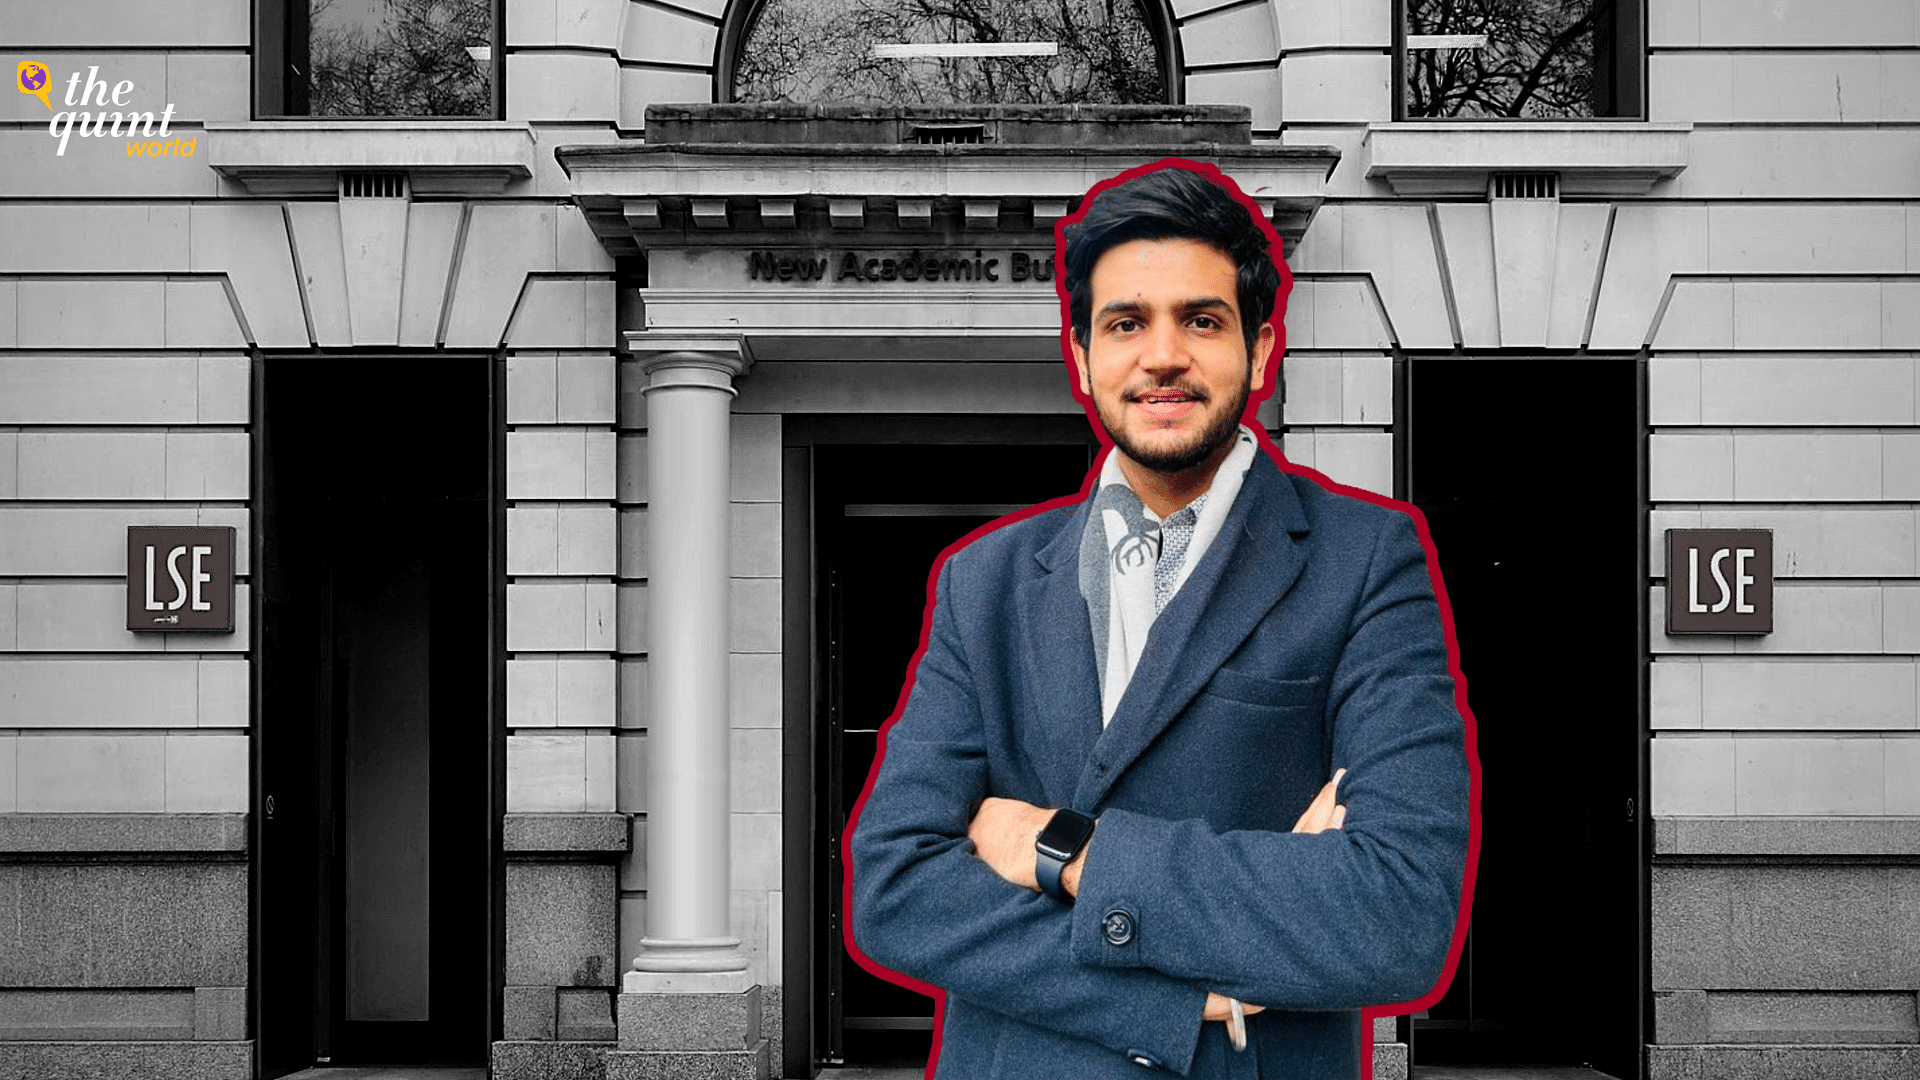 <div class="paragraphs"><p><strong>The Quint</strong> spoke to several students from LSE who painted a contrasting image of the student union elections, Karan Kataria's campaign, and the allegations against him.</p></div>